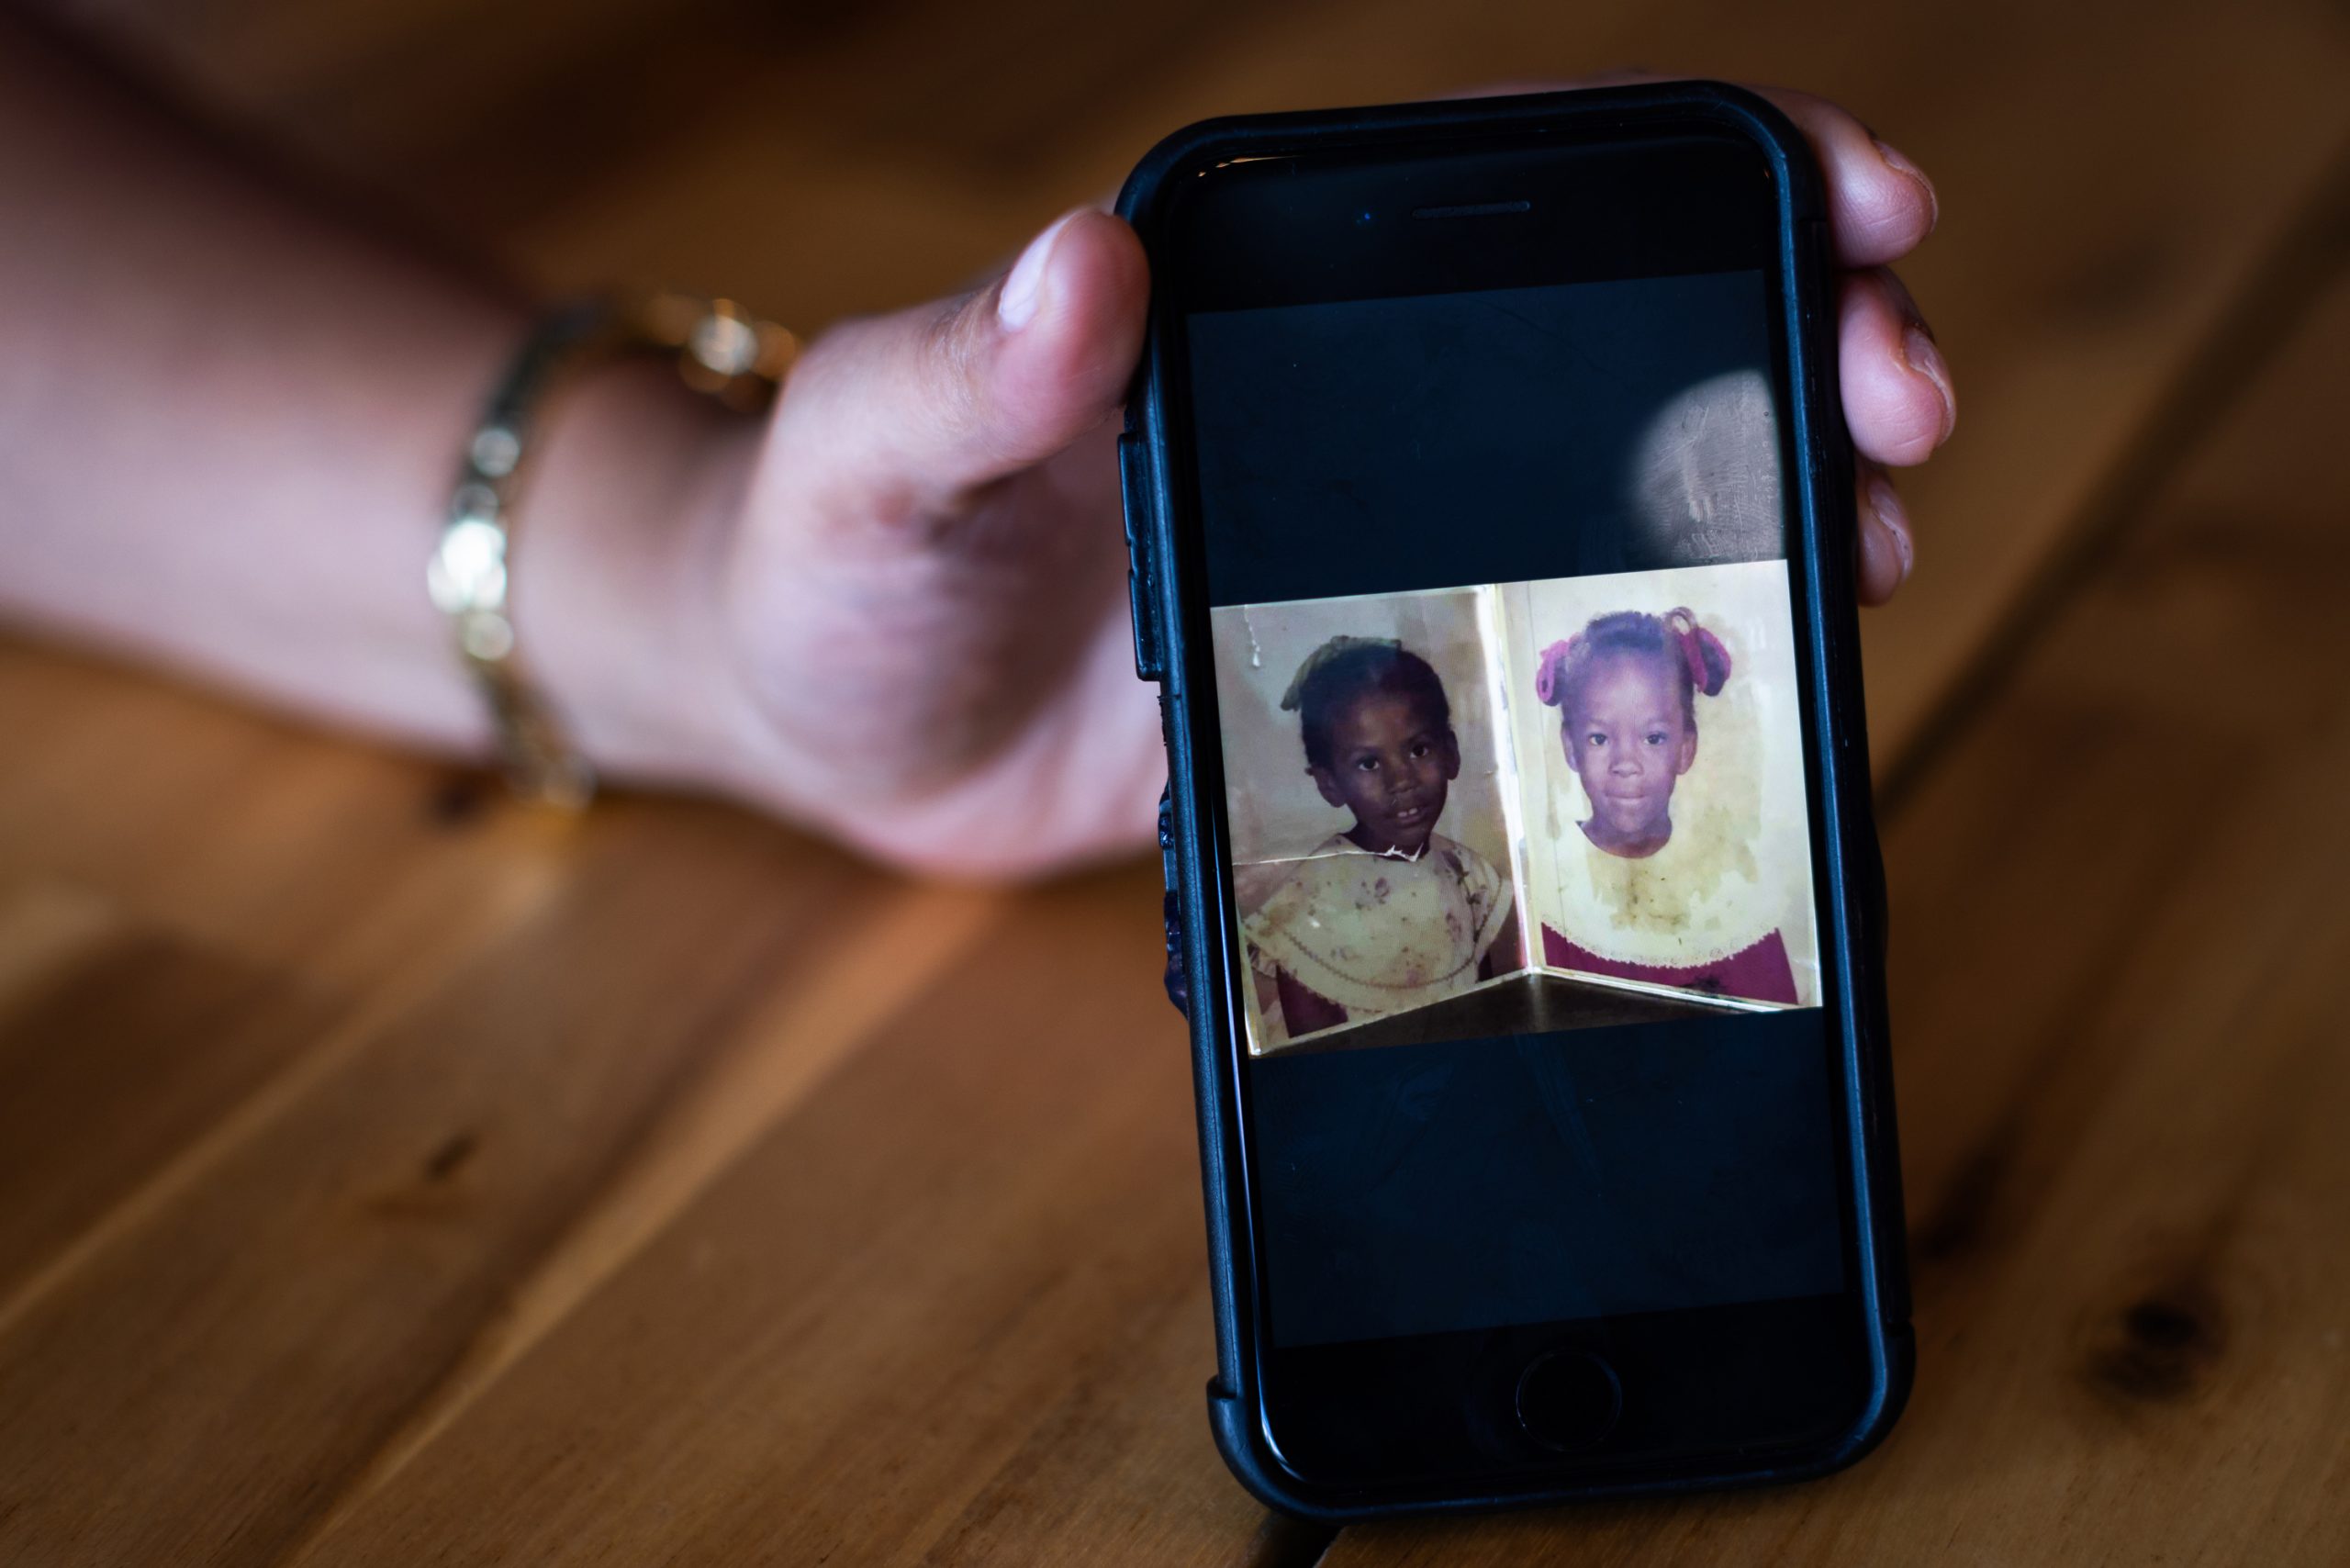 Alesia Morris shows a photo on her cellphone of her and her older sister, Richelle when they were kids.